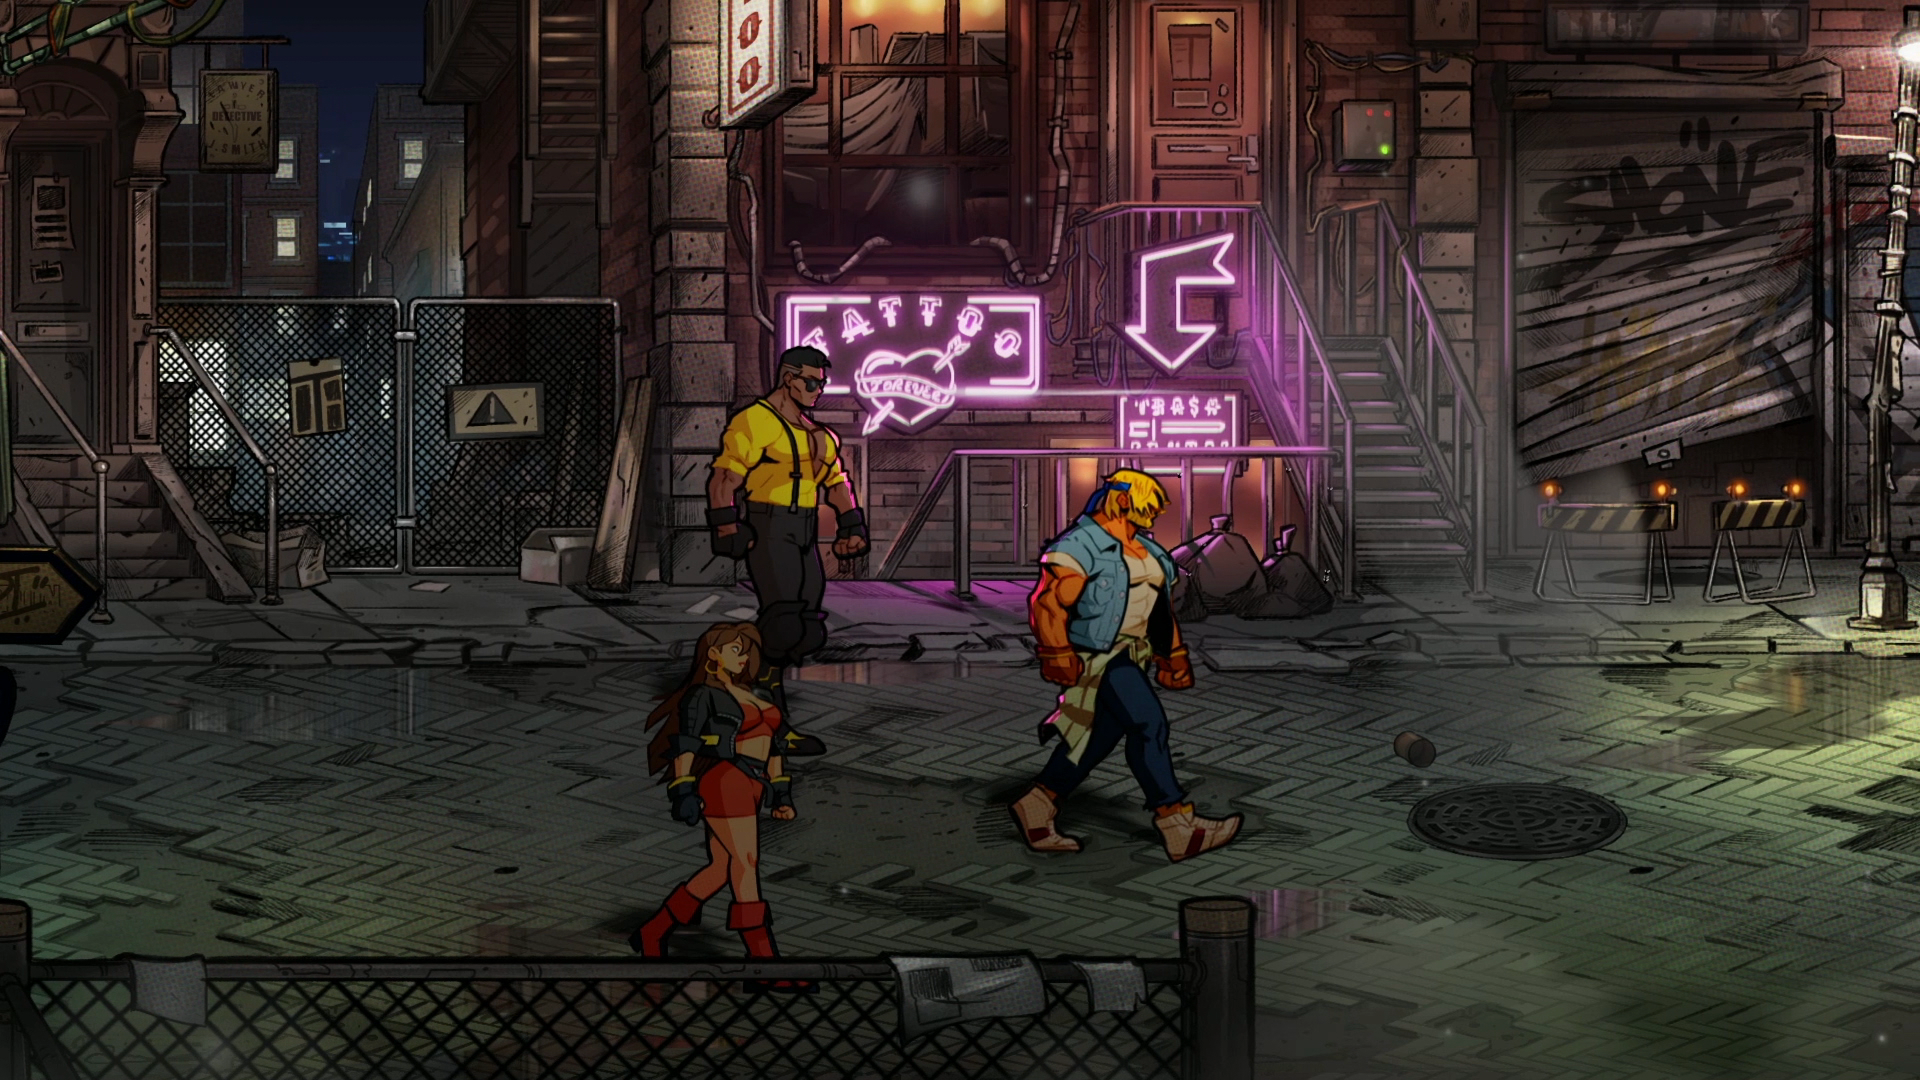 My Nostalgia is back with Streets of Rage 4 